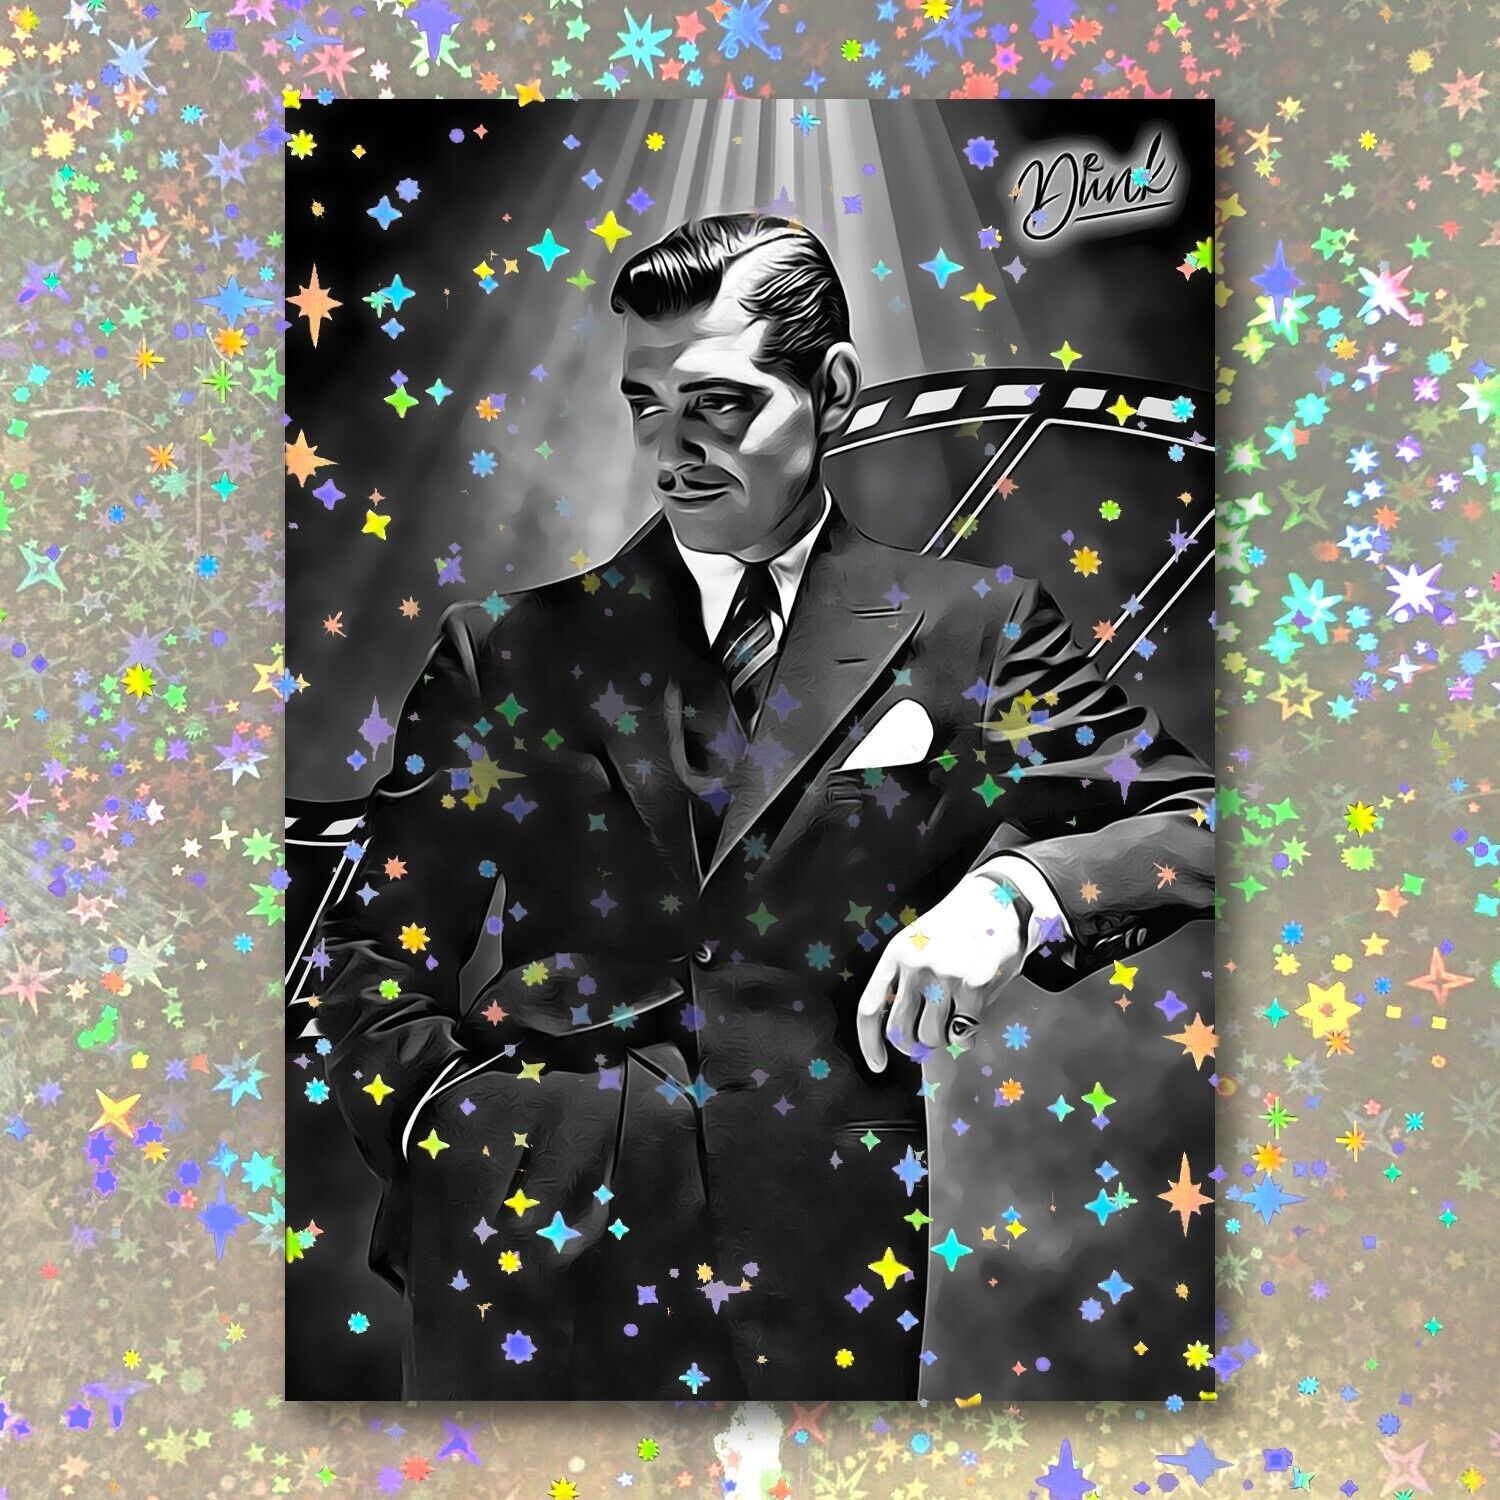 Clark Gable Holographic Silver Screen Sketch Card Limited 1/5 Dr. Dunk Signed